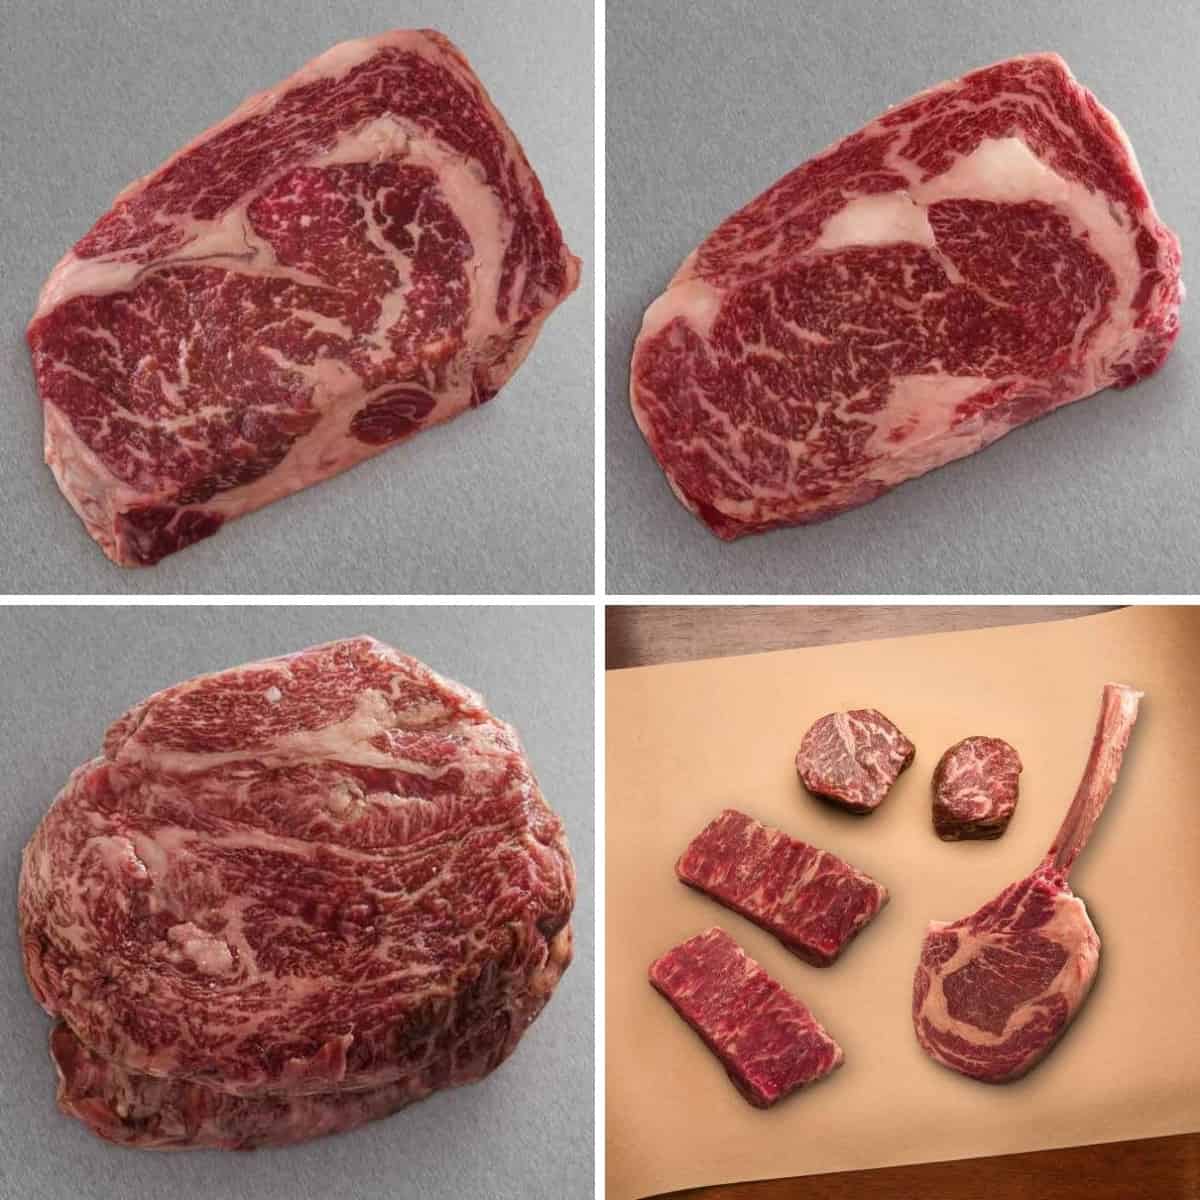 A four photo montage of ribeye cuts from snake river farms, all shot from above